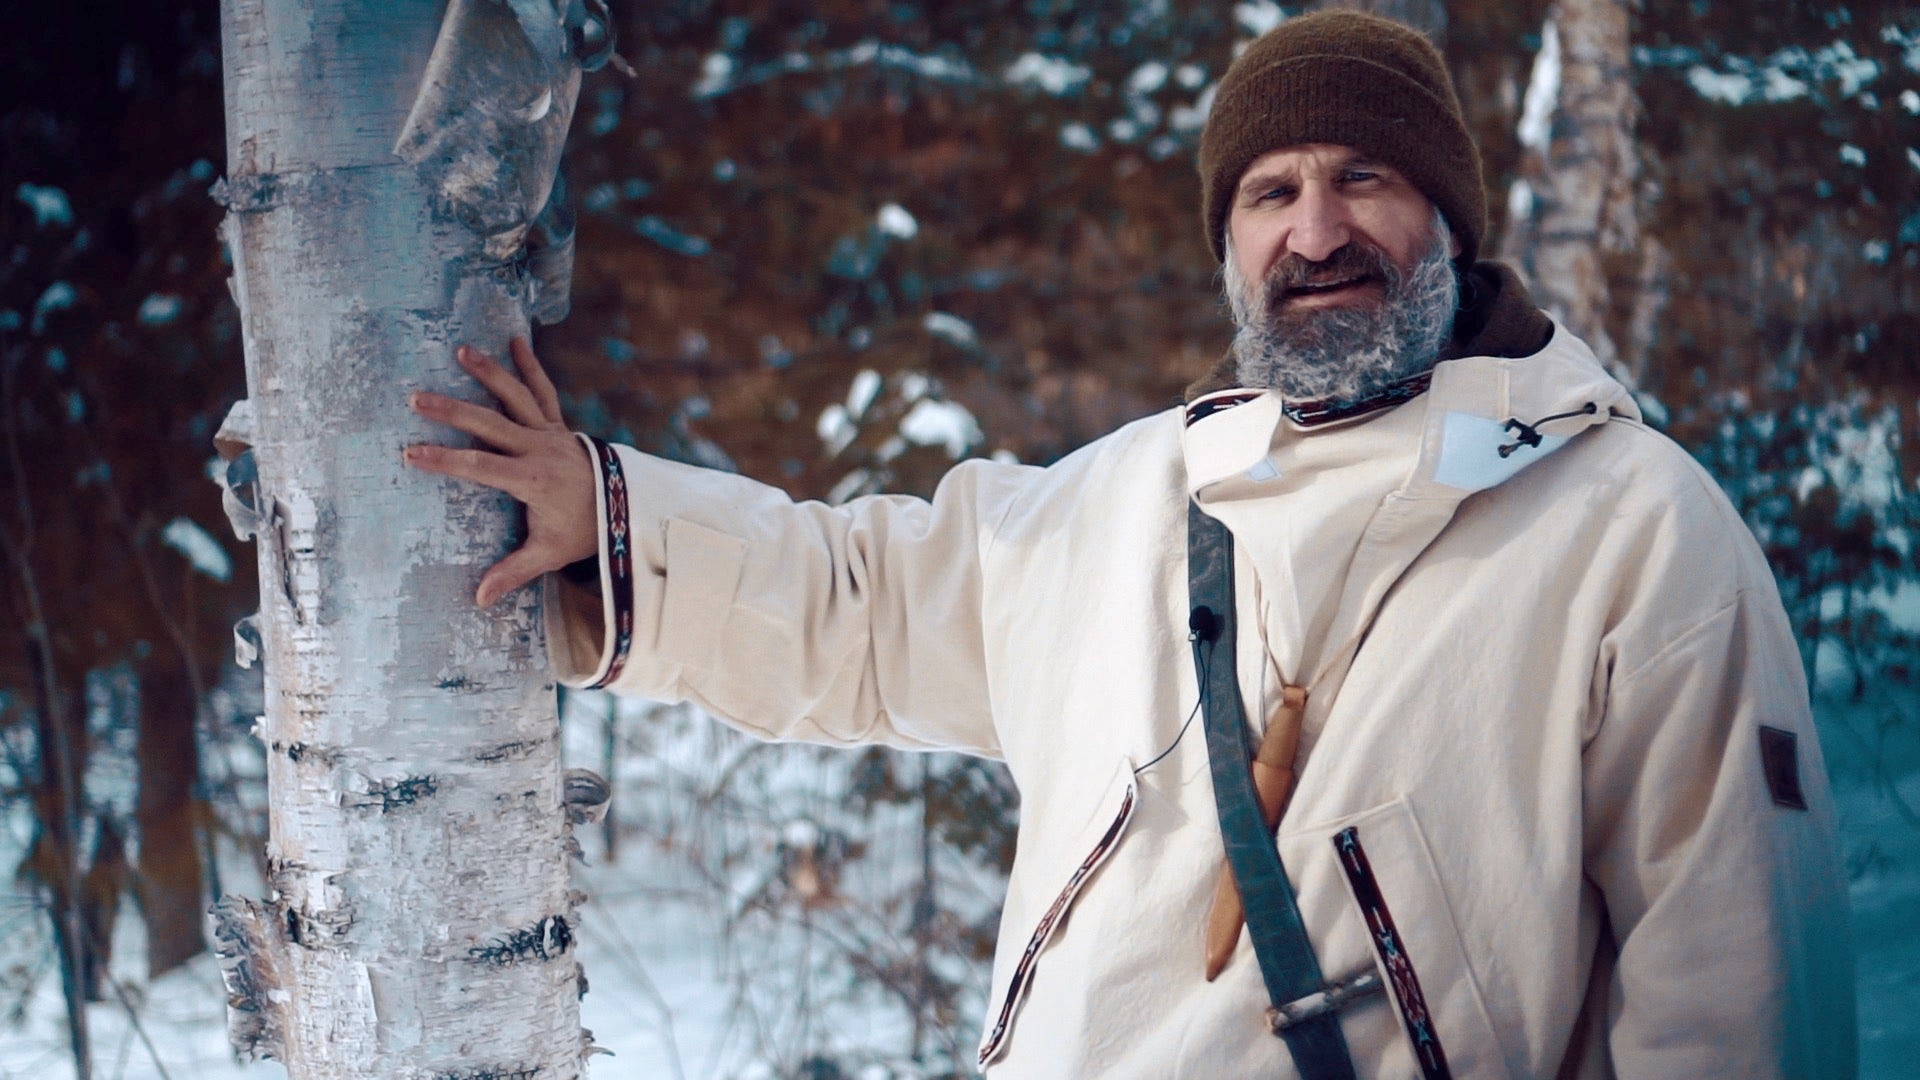 Into the Winter DVD + Free Streaming Limited Offer - Gray Bearded Green Beret